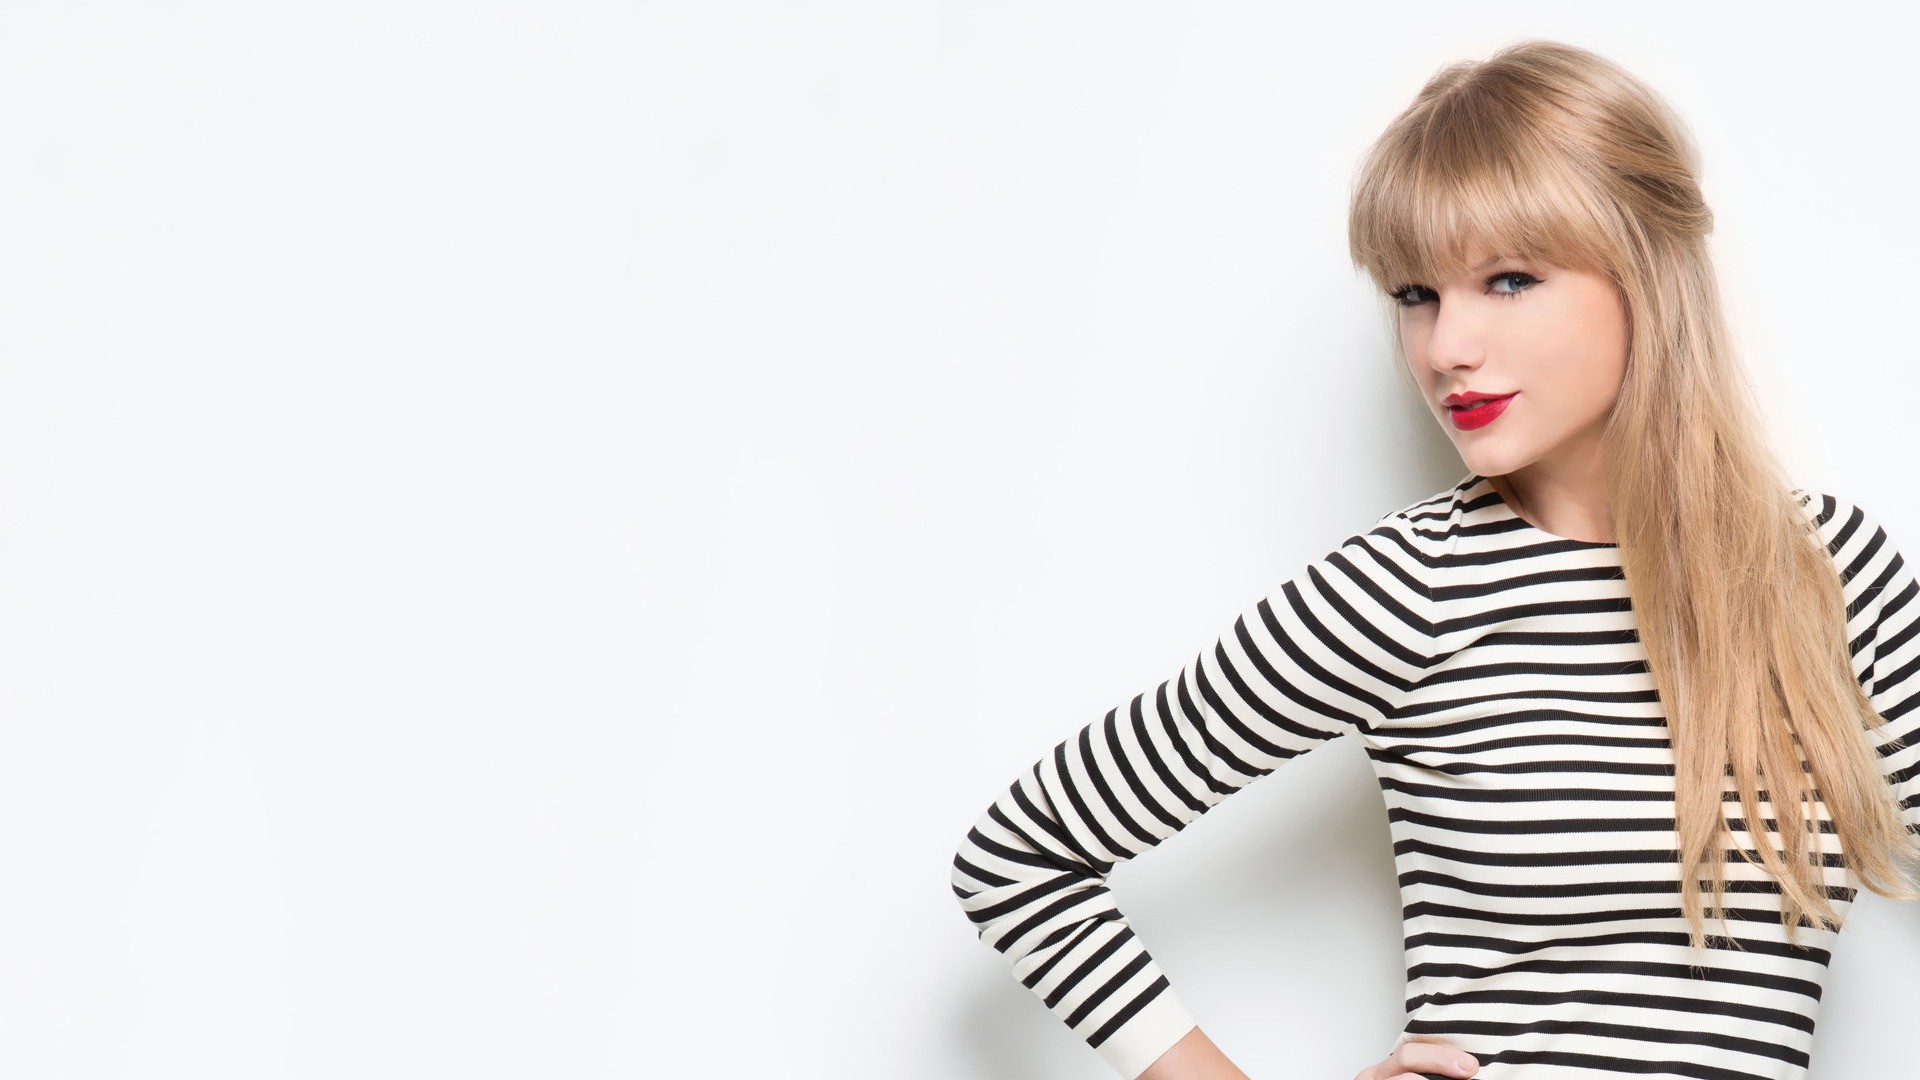 People 1920x1080 Taylor Swift celebrity blonde singer striped clothing red lipstick white background hands on hips women studio makeup long hair simple background women indoors